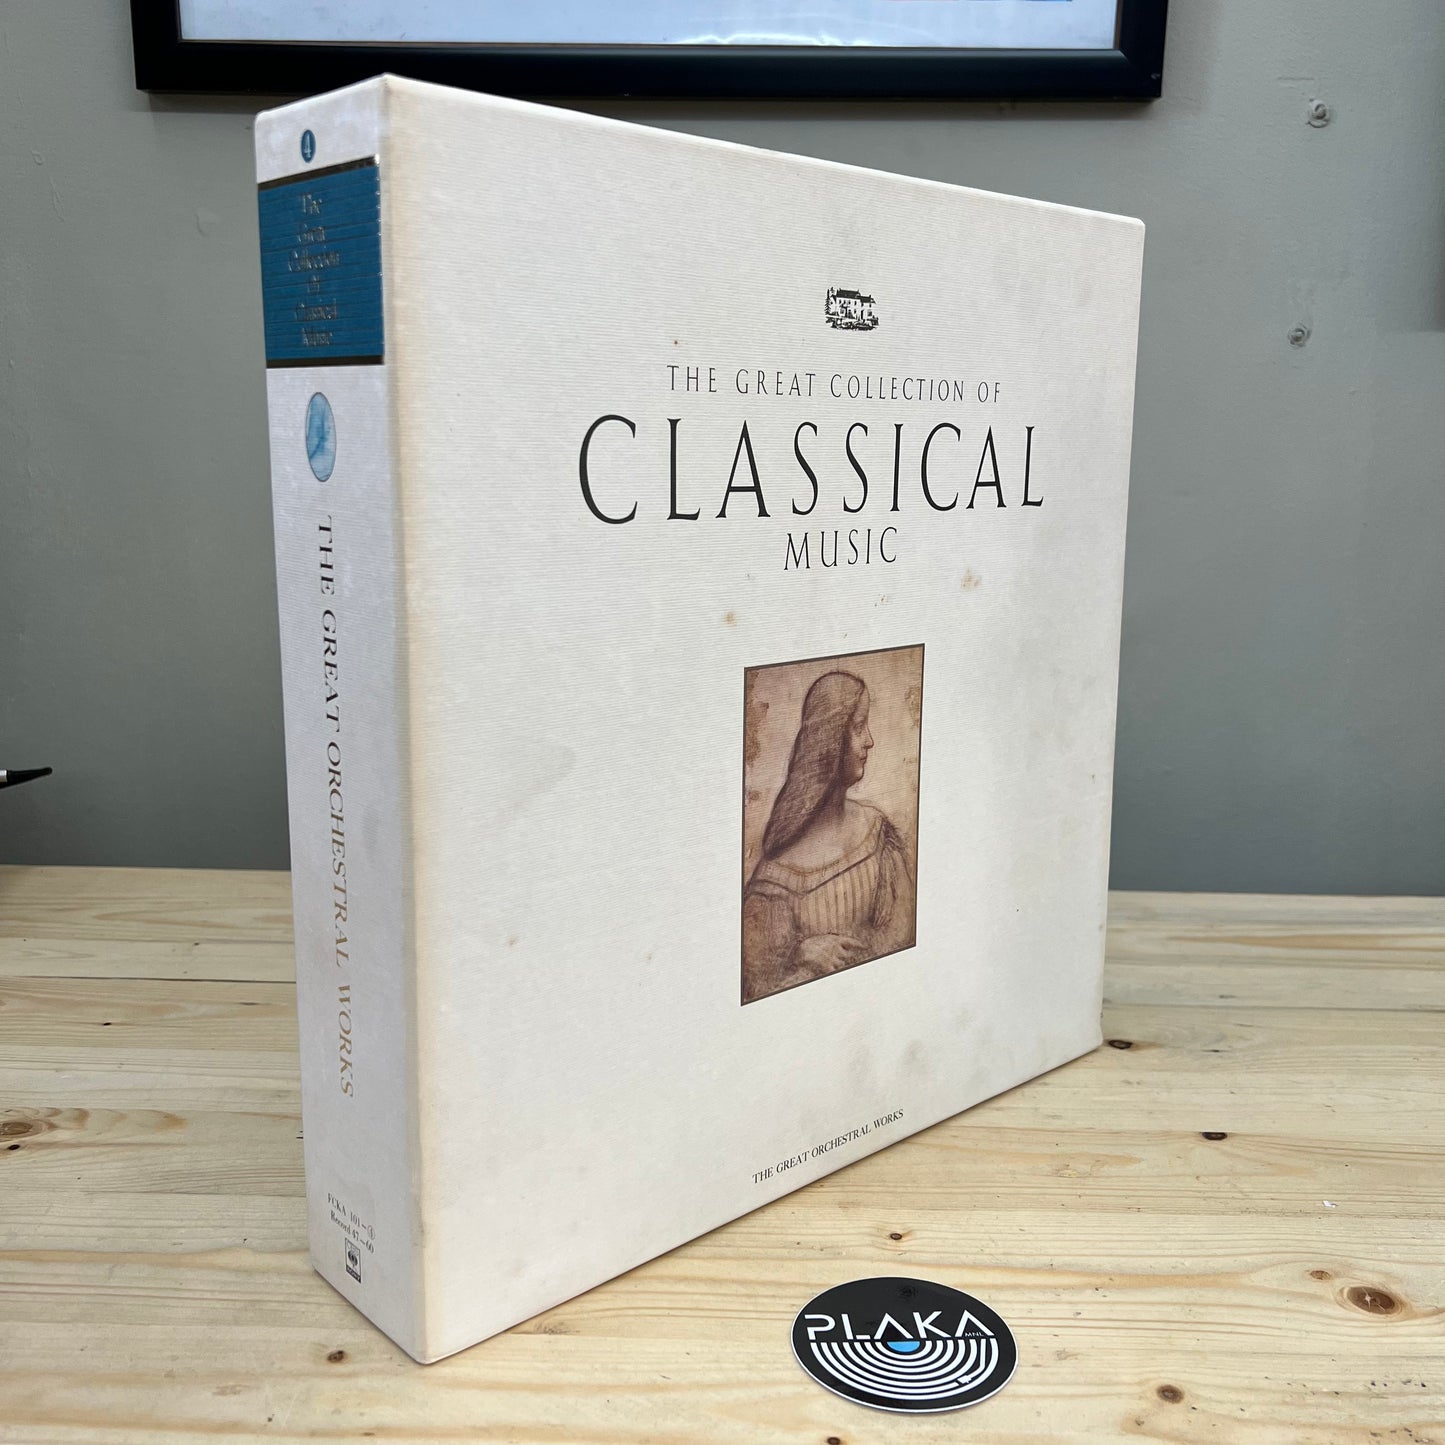 The Great Collection of Classical Music : The Great Orchestral Works (Box Set No.4)